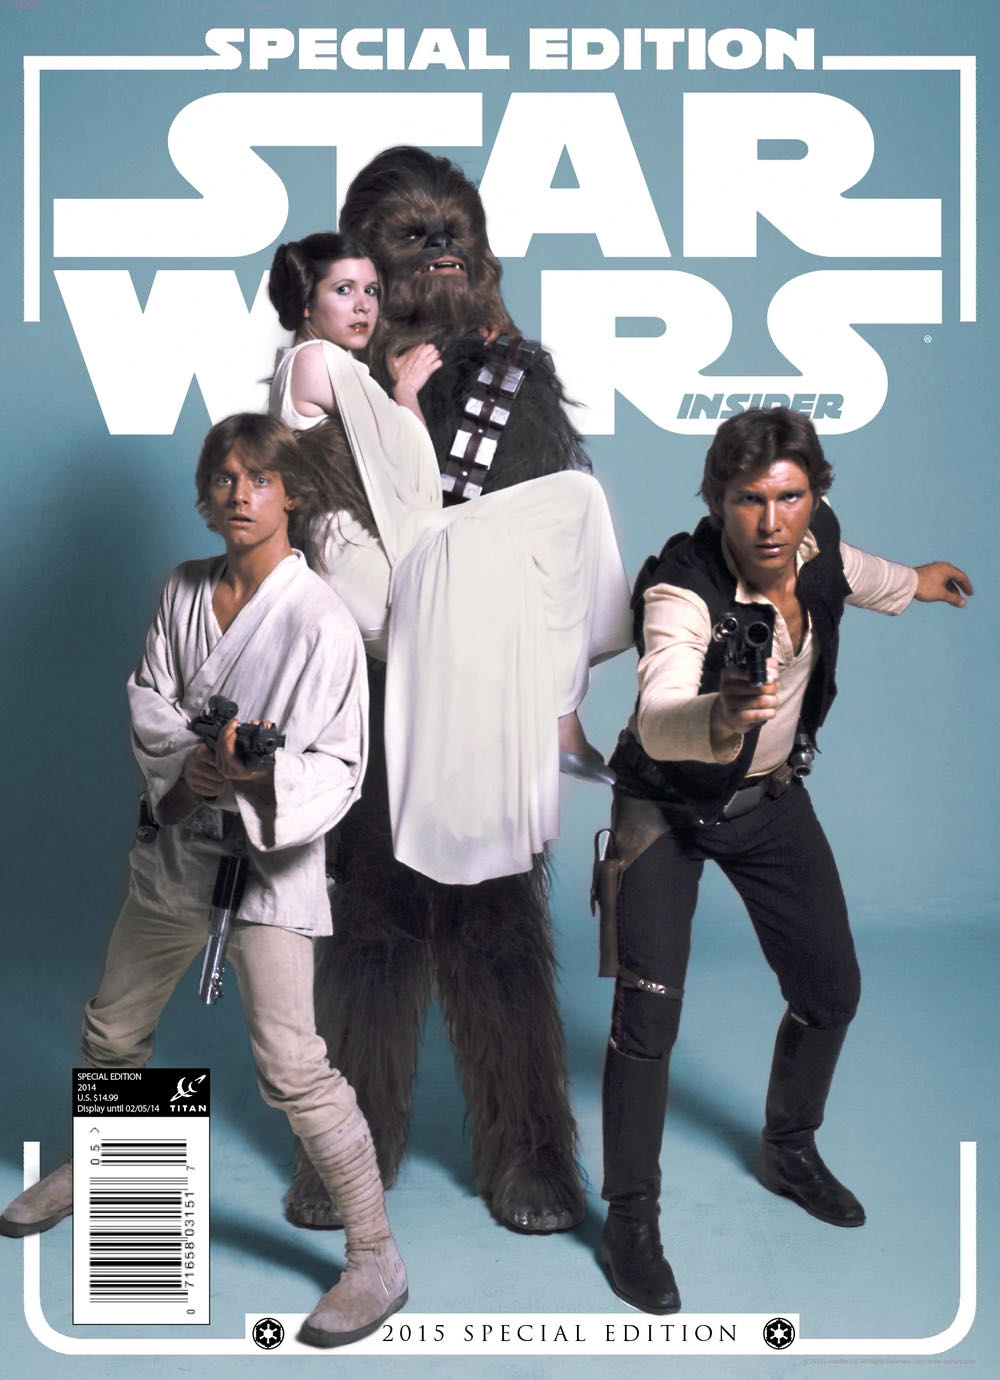 Star Wars Insider 2015 Special Edition  magazine collectible [Barcode 07148622099206] - Main Image 1